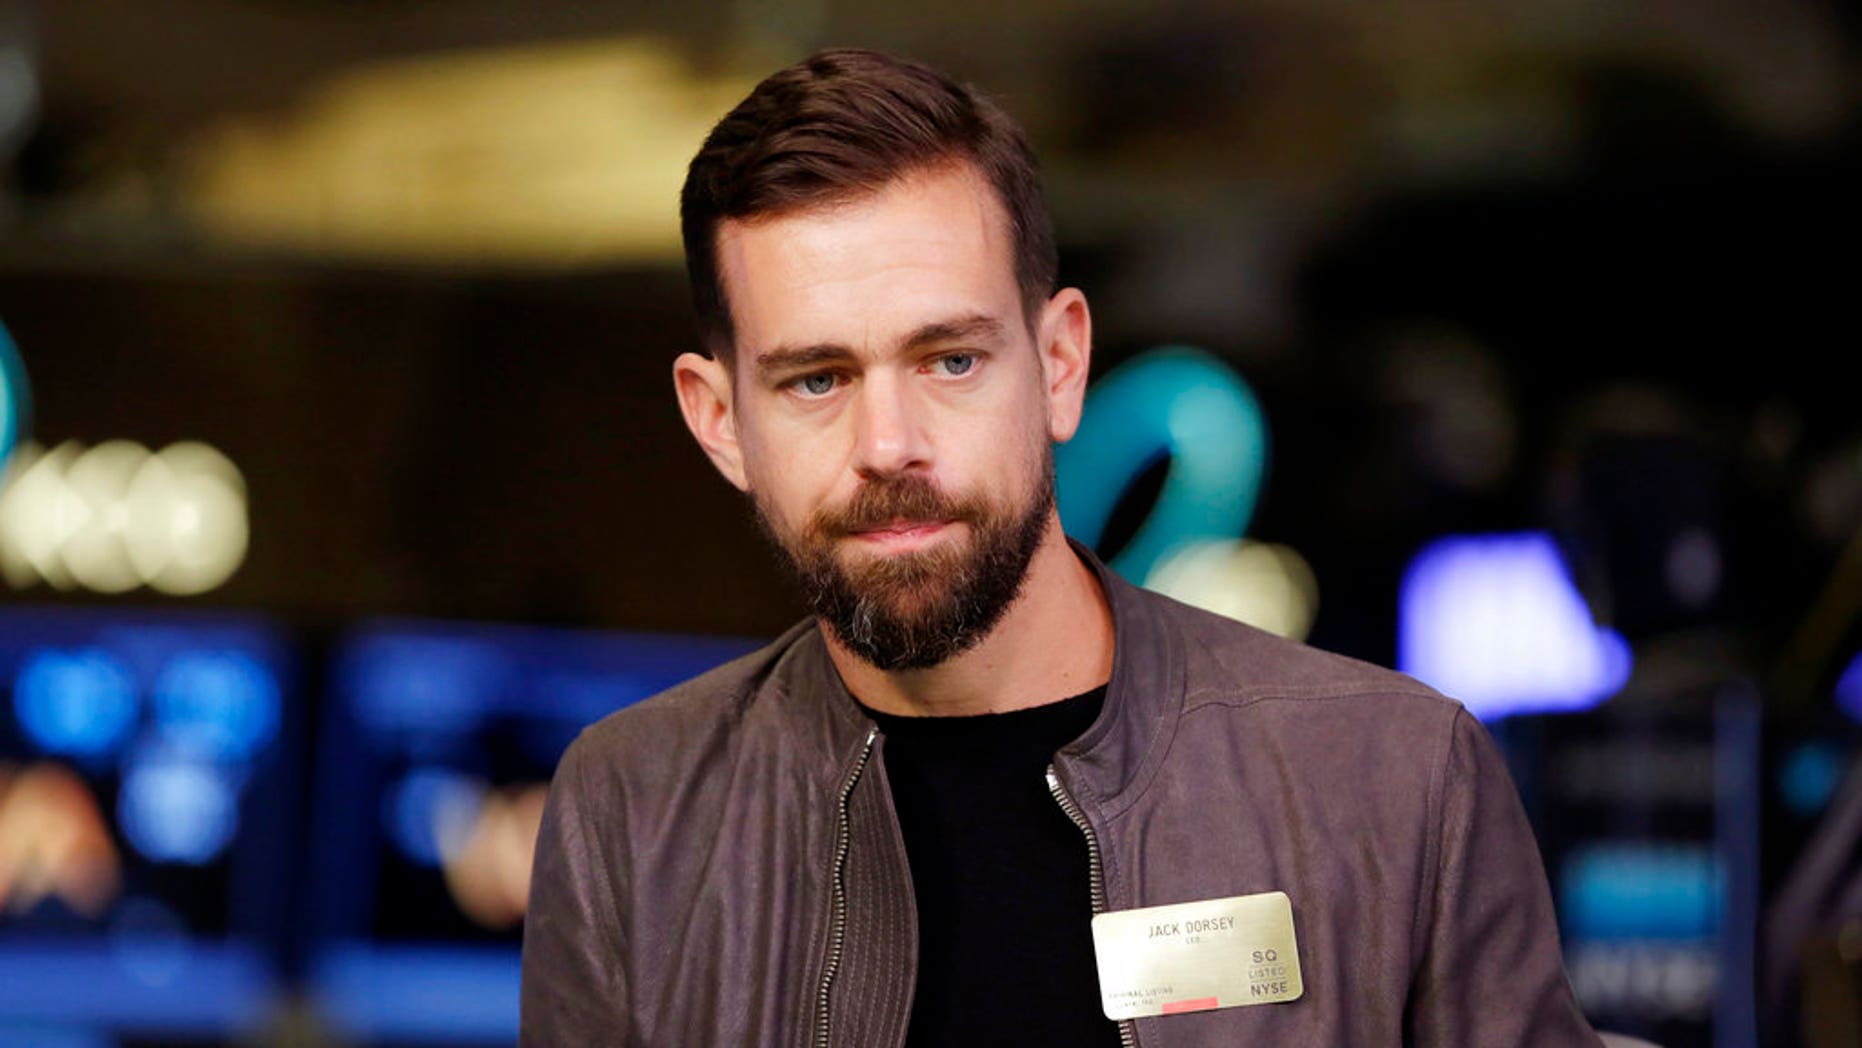 sources paypal mafia jack dorsey twitter